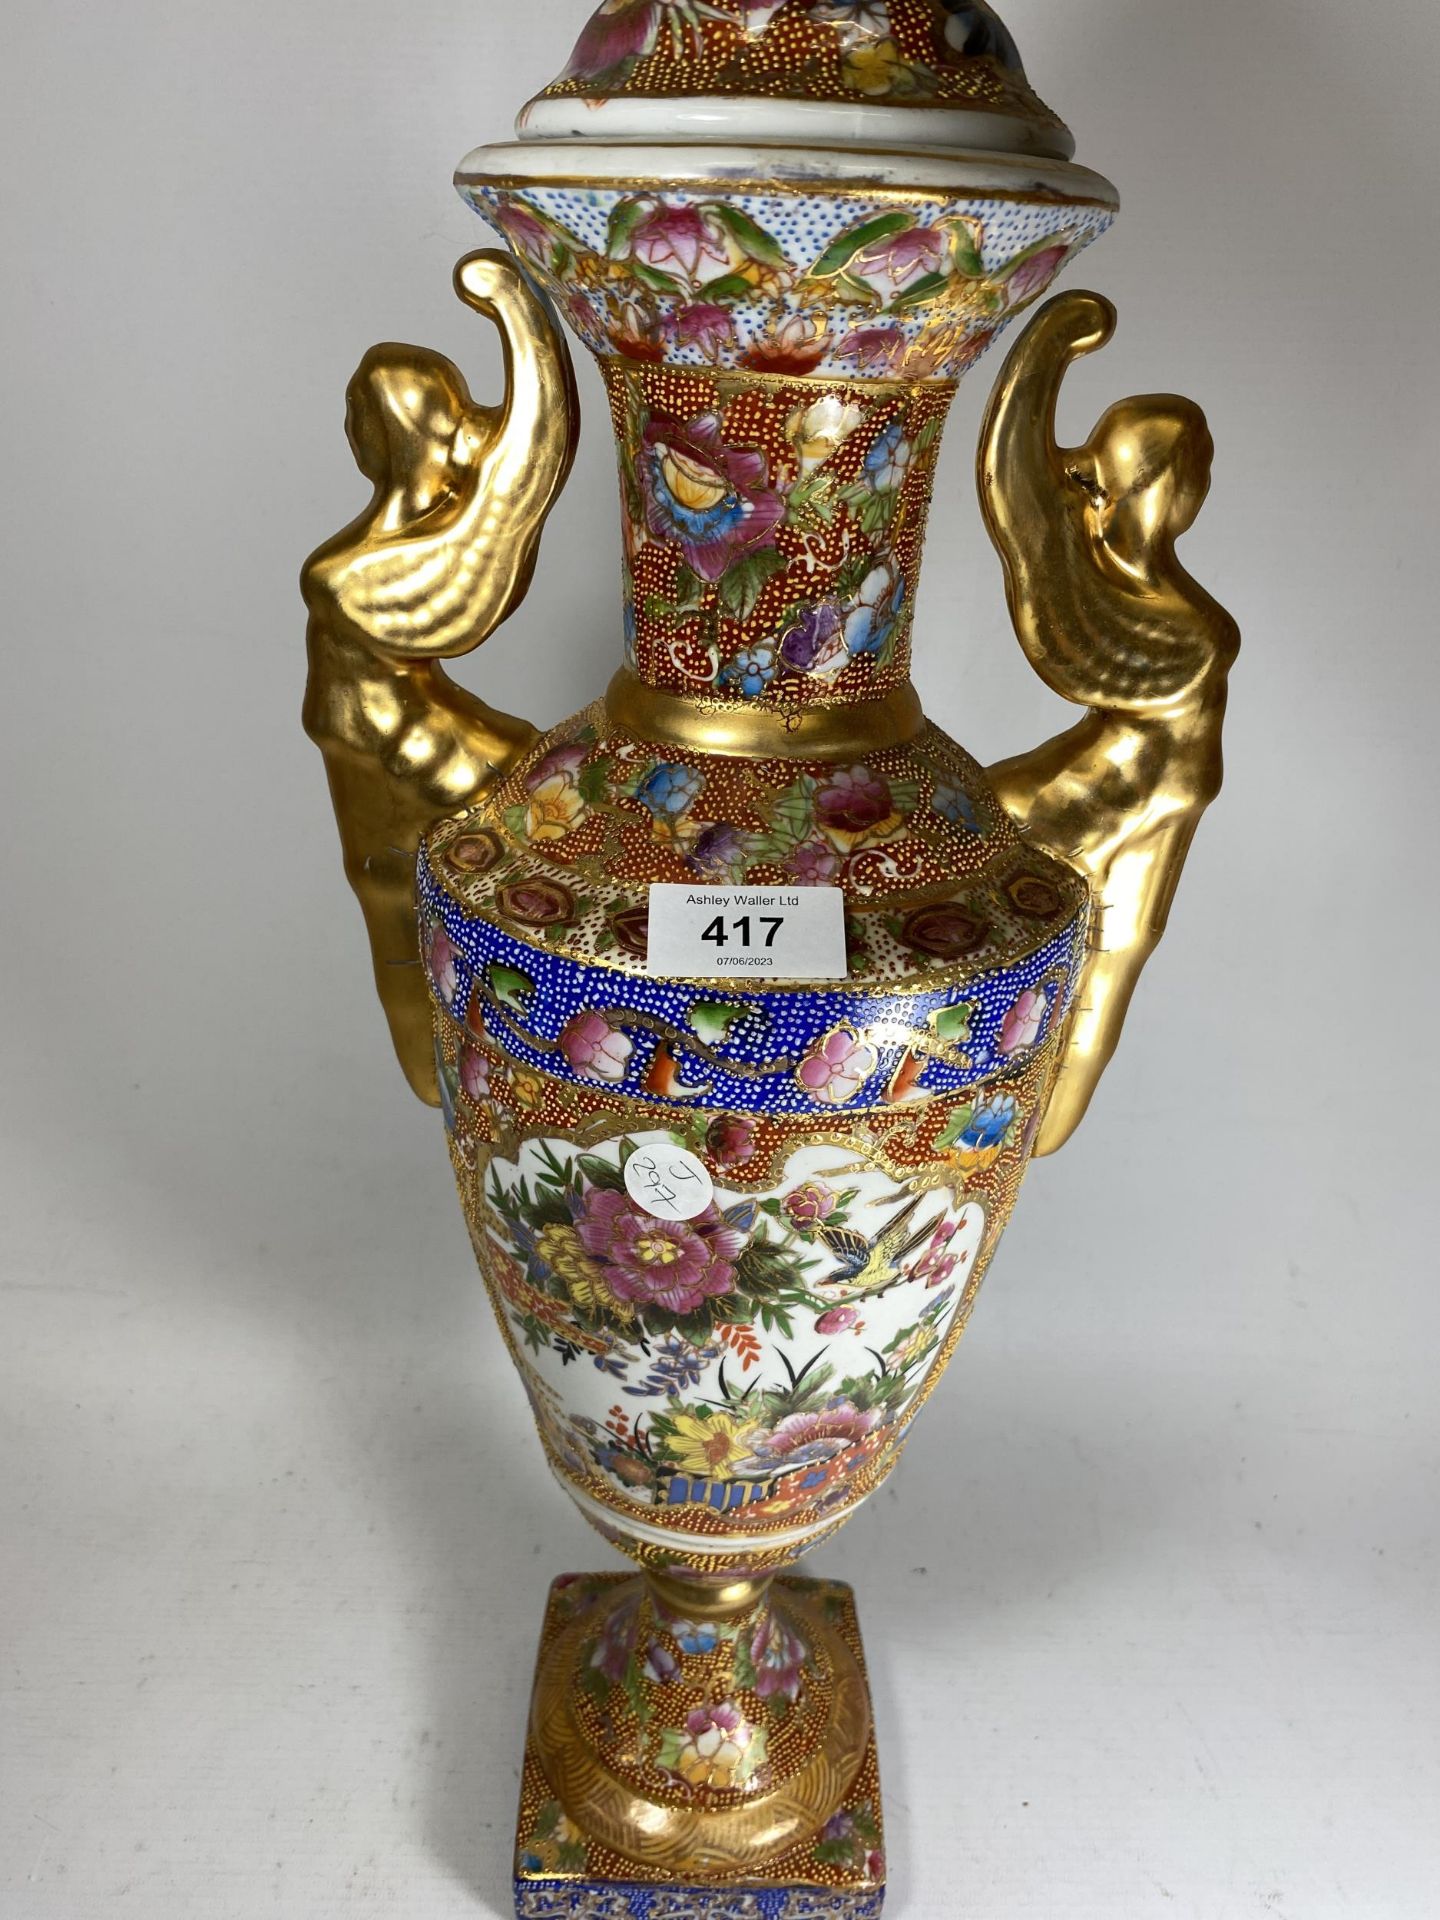 A LARGE DECORATIVE JAPANESE LIDDED TWIN HANDLED VASE, HEIGHT 56CM - Image 2 of 3